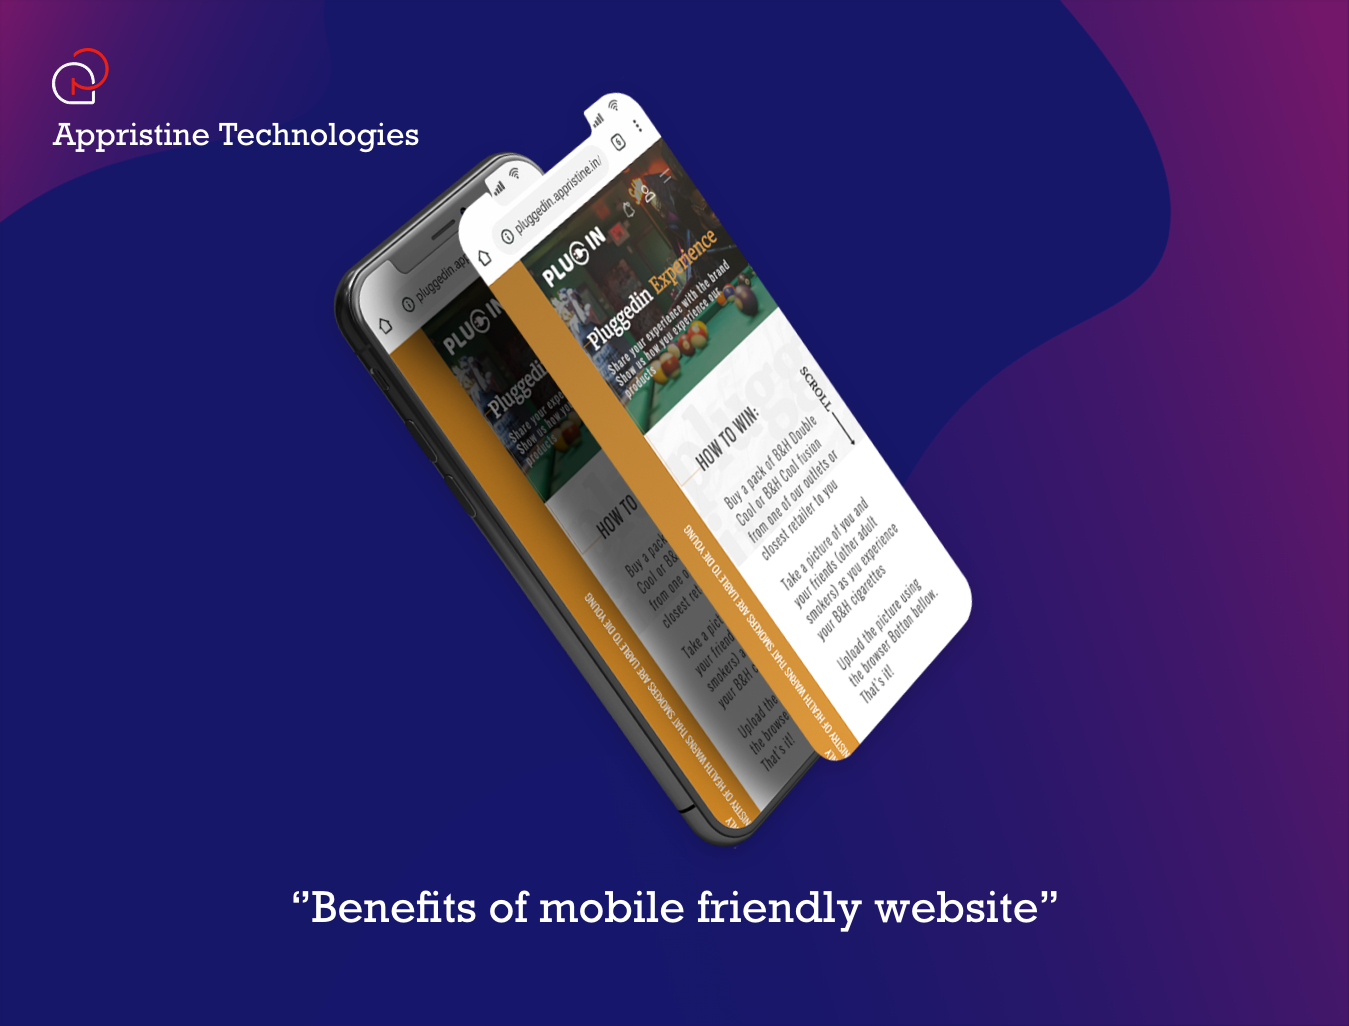 7 Mind Blowing Benefits of mobile friendly website